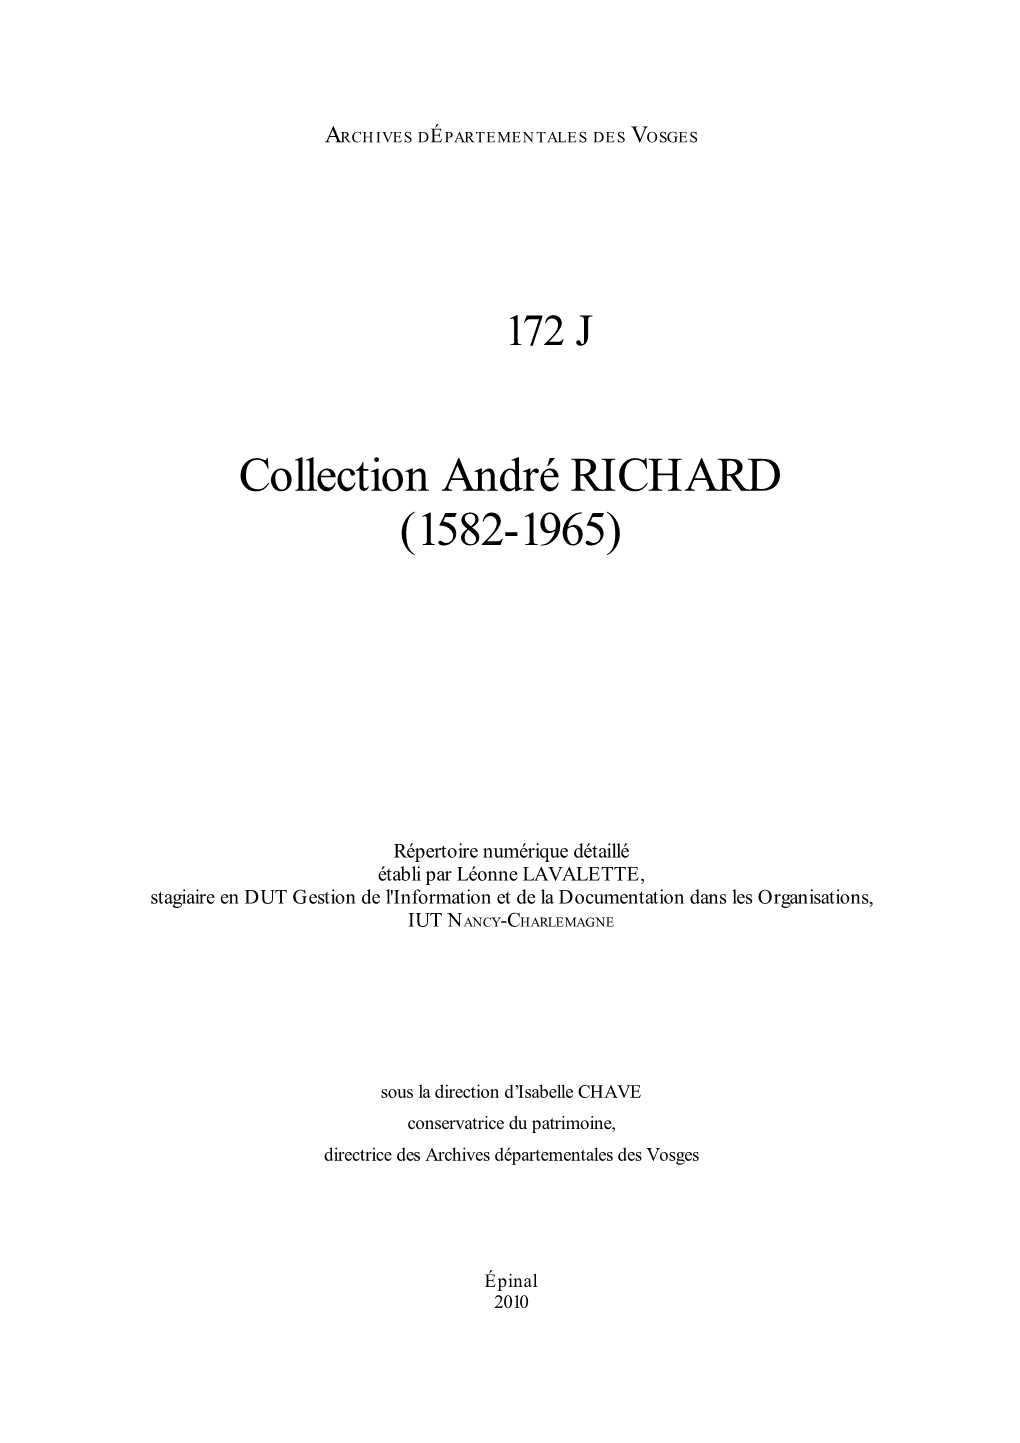 Collection André RICHARD (1582-1965)